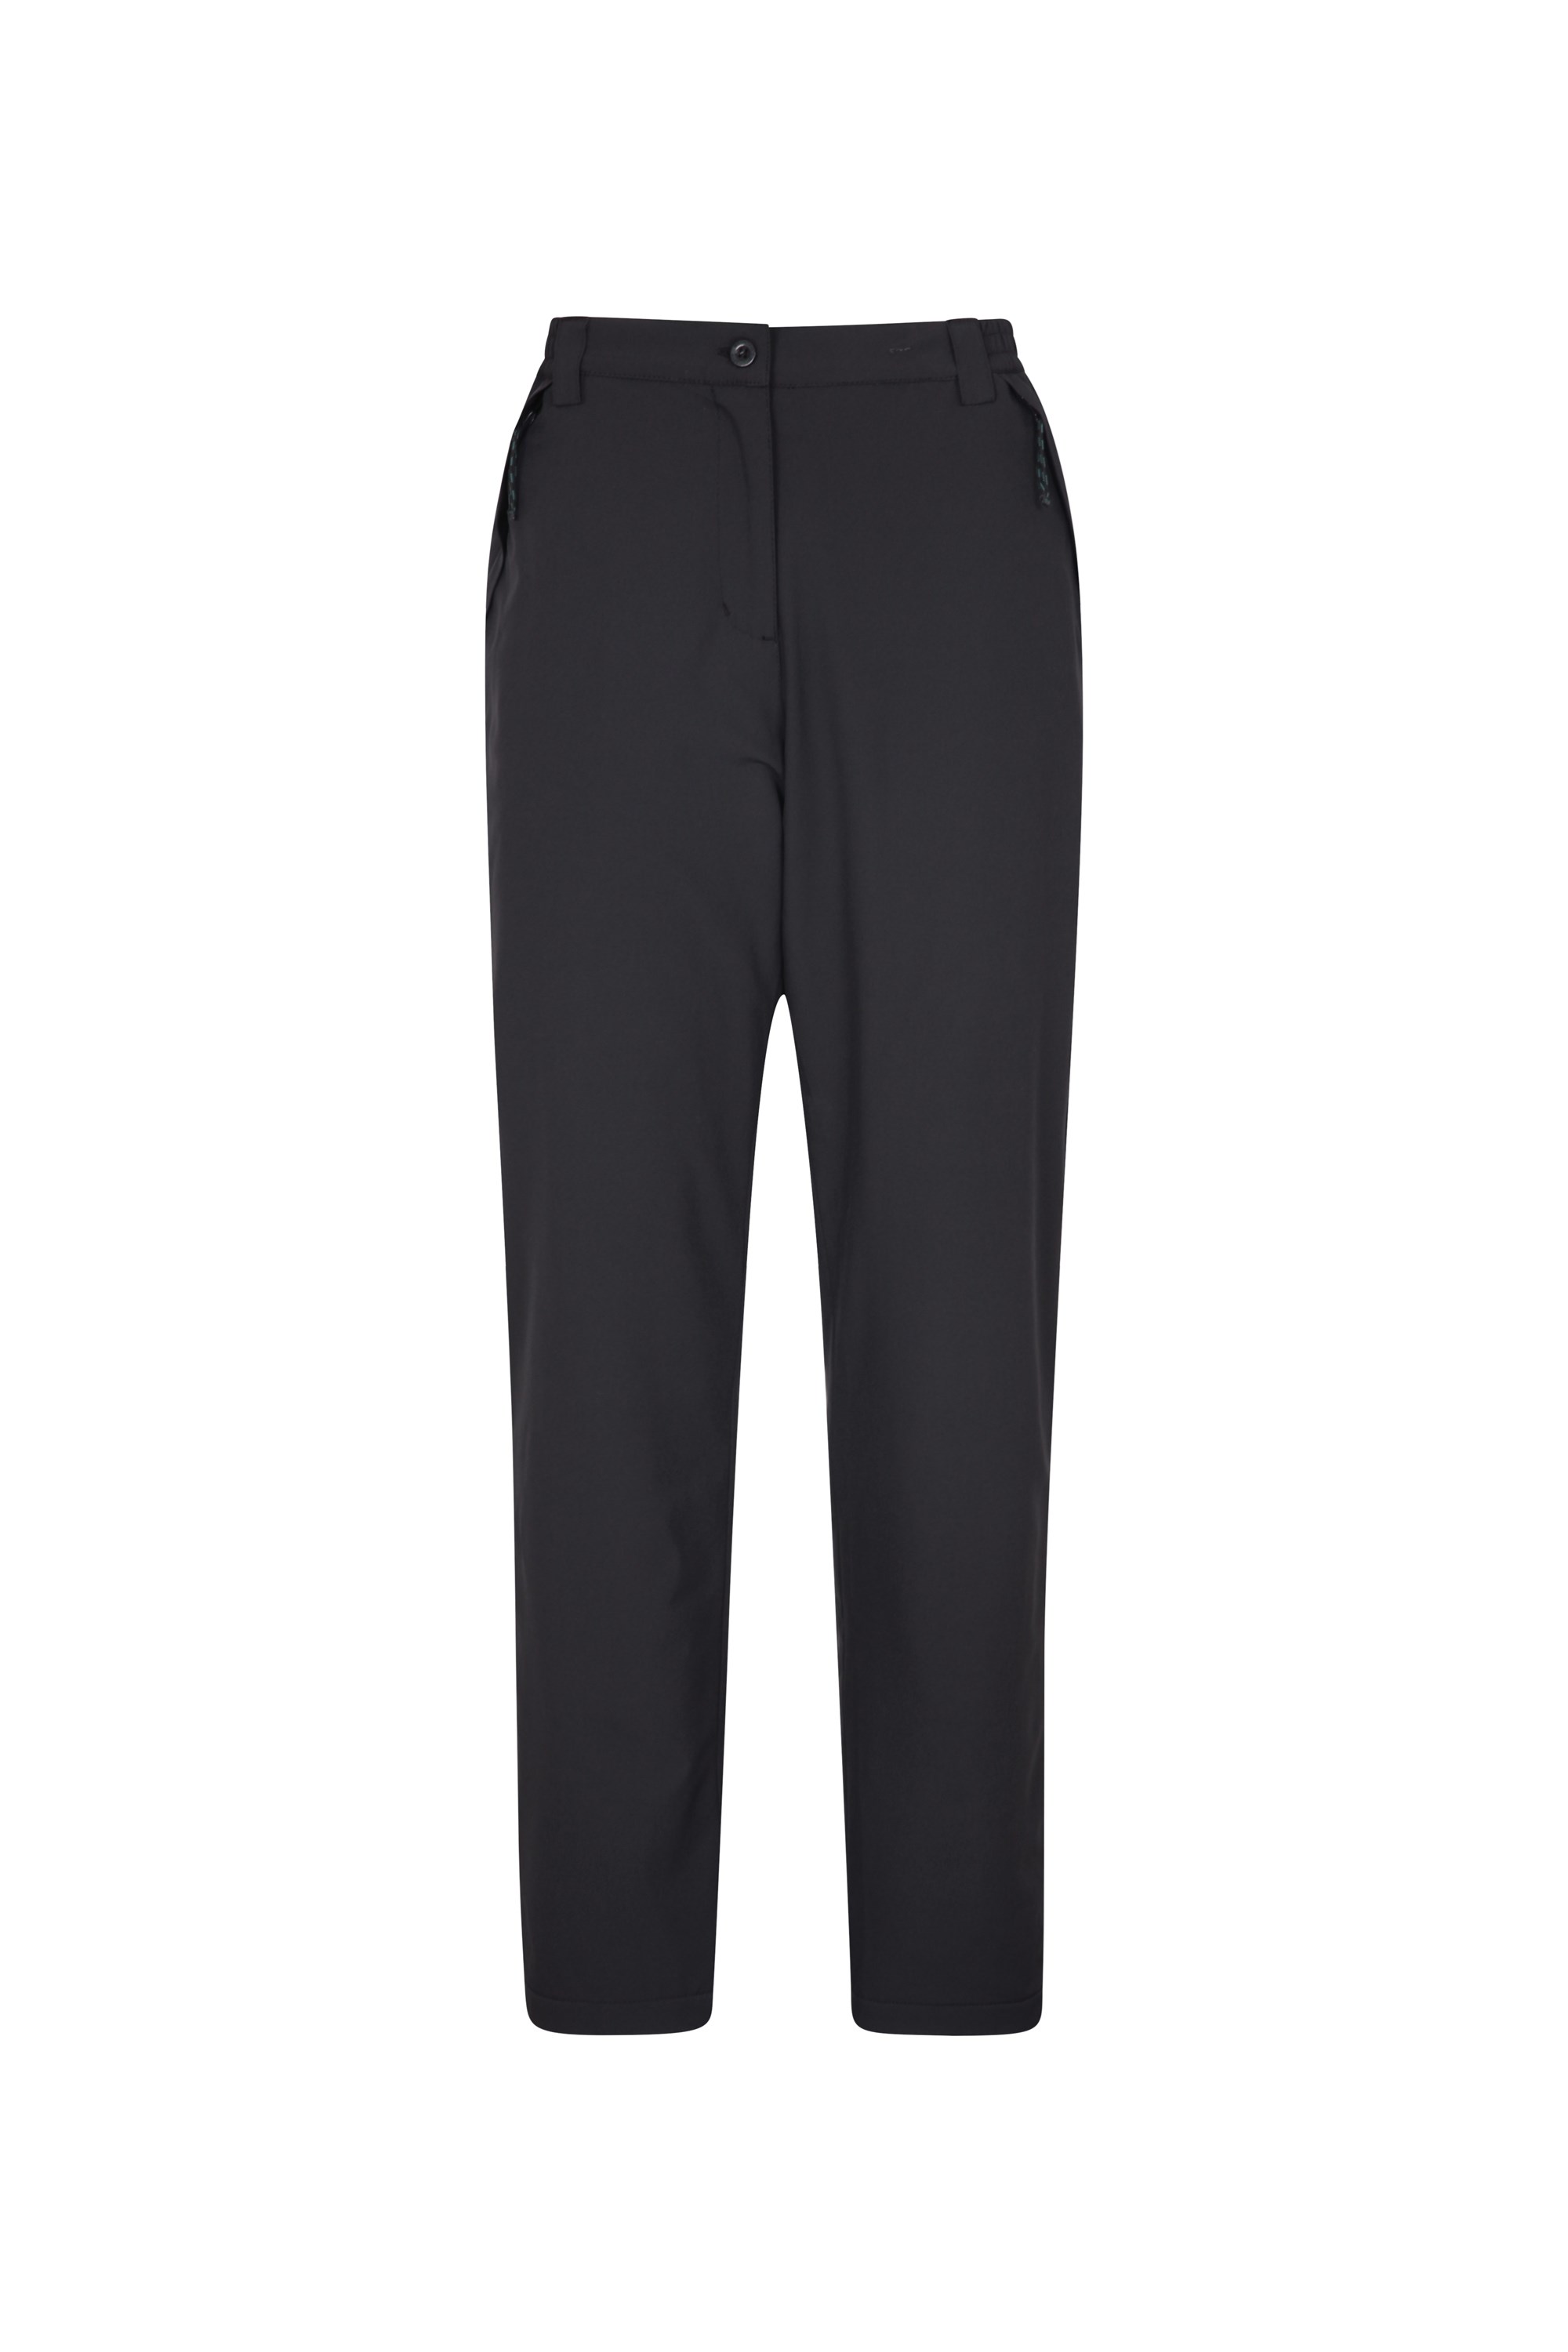 Mountain Warehouse Arctic Fleece Lined Stretch Womens Trousers Black